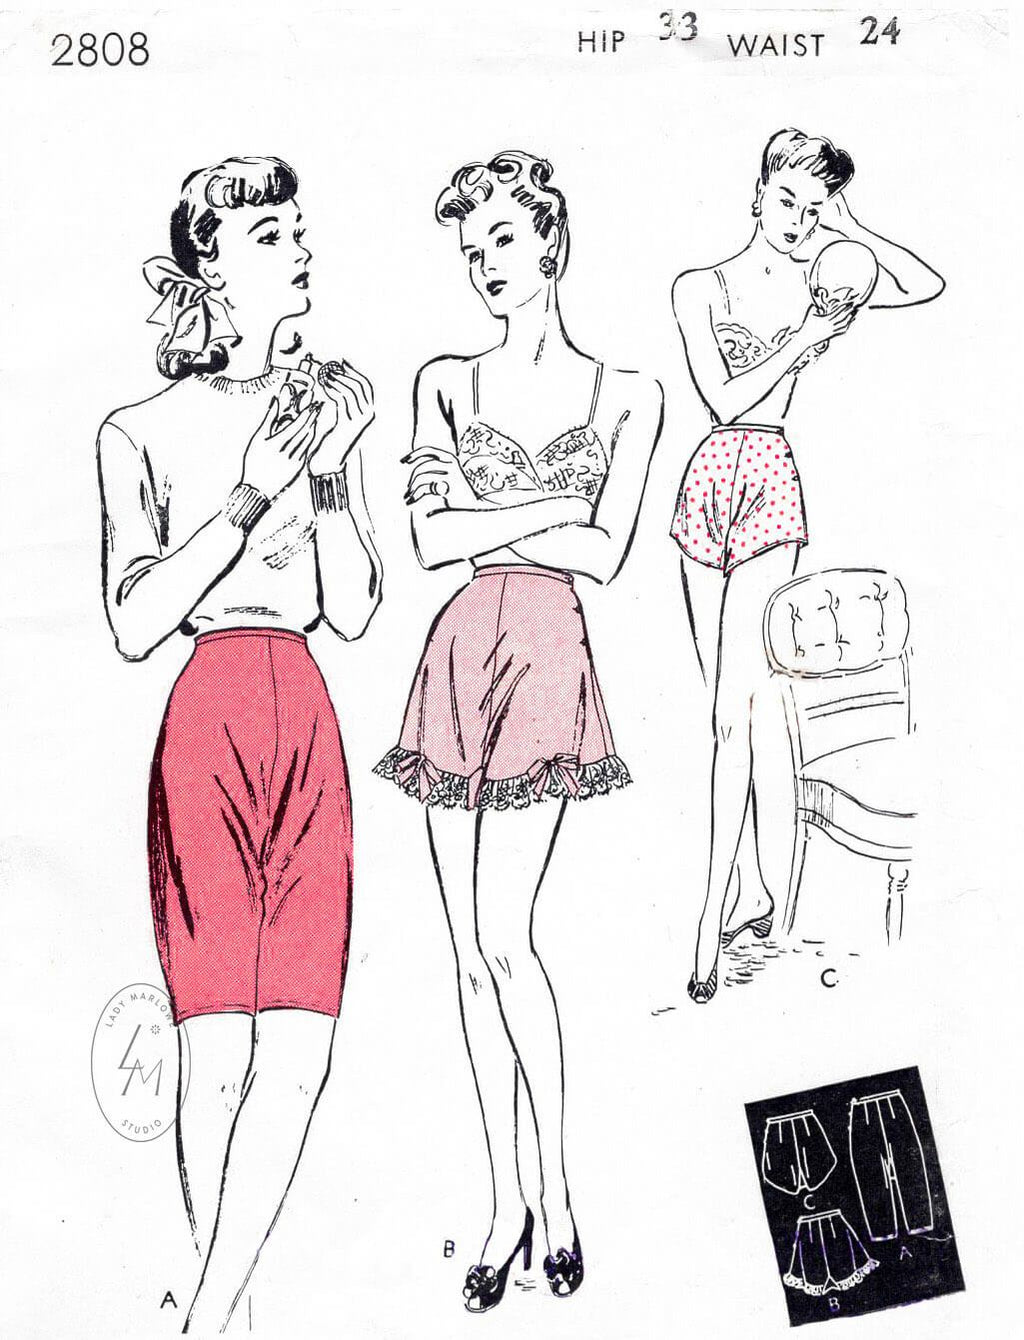 1940s Butterick 2808 vintage lingerie sewing pattern shorts and panties